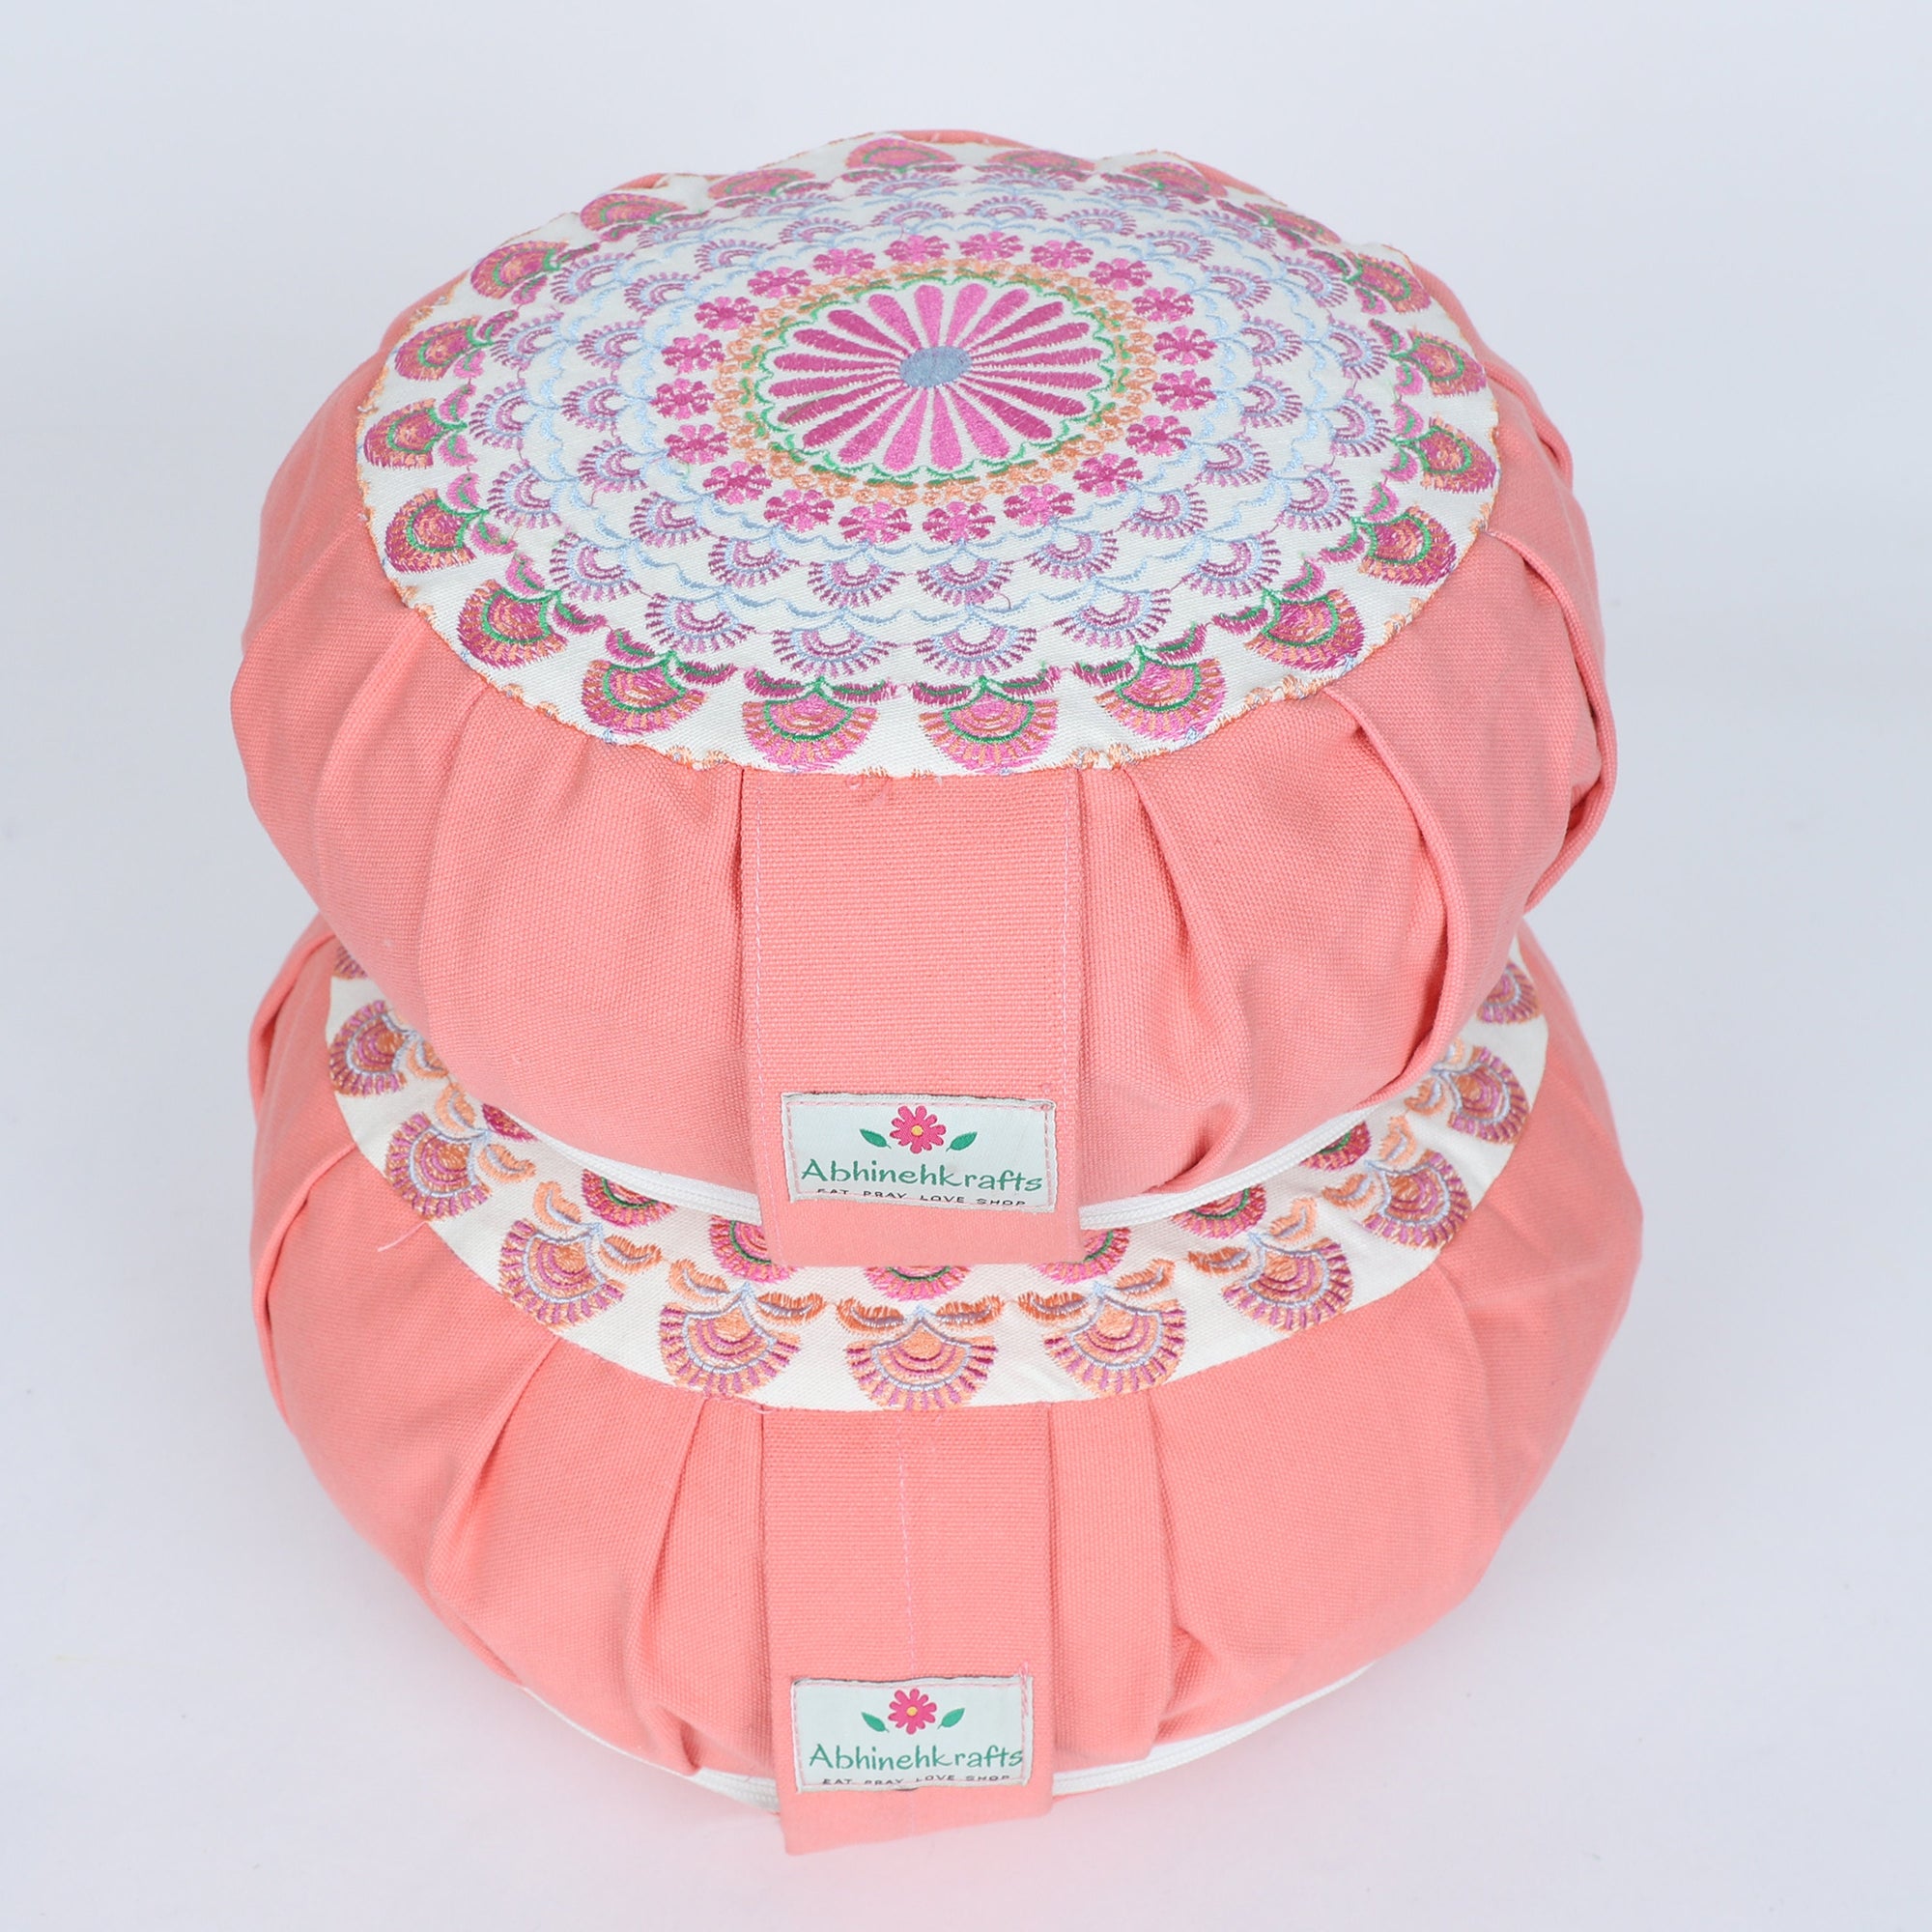 Embroidered Round Zafu Yoga Pillow |Zipped Cover |Washable| Portable - Alaknanda (Pink on PeachPink) - Size and Filling Options